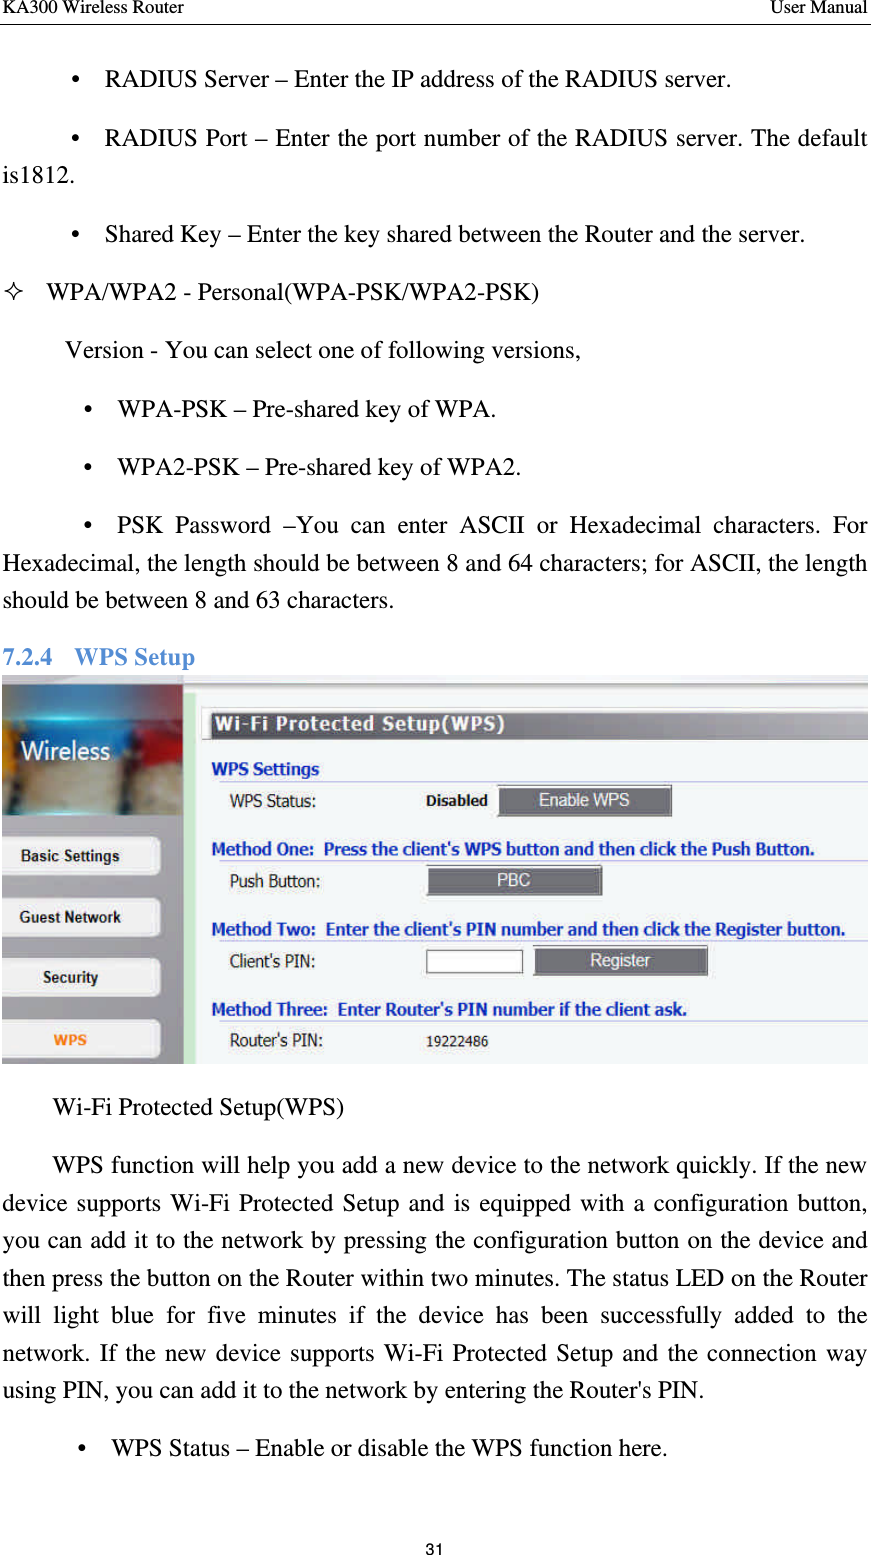 KA300 Wireless Router       User Manual 31      •  RADIUS Server – Enter the IP address of the RADIUS server.    •  RADIUS Port – Enter the port number of the RADIUS server. The default is1812.    •  Shared Key – Enter the key shared between the Router and the server.   ² WPA/WPA2 - Personal(WPA-PSK/WPA2-PSK)  Version - You can select one of following versions,       •  WPA-PSK – Pre-shared key of WPA.     •  WPA2-PSK – Pre-shared key of WPA2.       •  PSK Password –You can enter ASCII or Hexadecimal characters. For Hexadecimal, the length should be between 8 and 64 characters; for ASCII, the length should be between 8 and 63 characters. 7.2.4    WPS Setup  Wi-Fi Protected Setup(WPS) WPS function will help you add a new device to the network quickly. If the new device supports Wi-Fi Protected Setup and is equipped with a configuration button, you can add it to the network by pressing the configuration button on the device and then press the button on the Router within two minutes. The status LED on the Router will light blue for five minutes if the device has been successfully added to the network. If the new device supports Wi-Fi Protected Setup and the connection way using PIN, you can add it to the network by entering the Router&apos;s PIN. •  WPS Status – Enable or disable the WPS function here. 